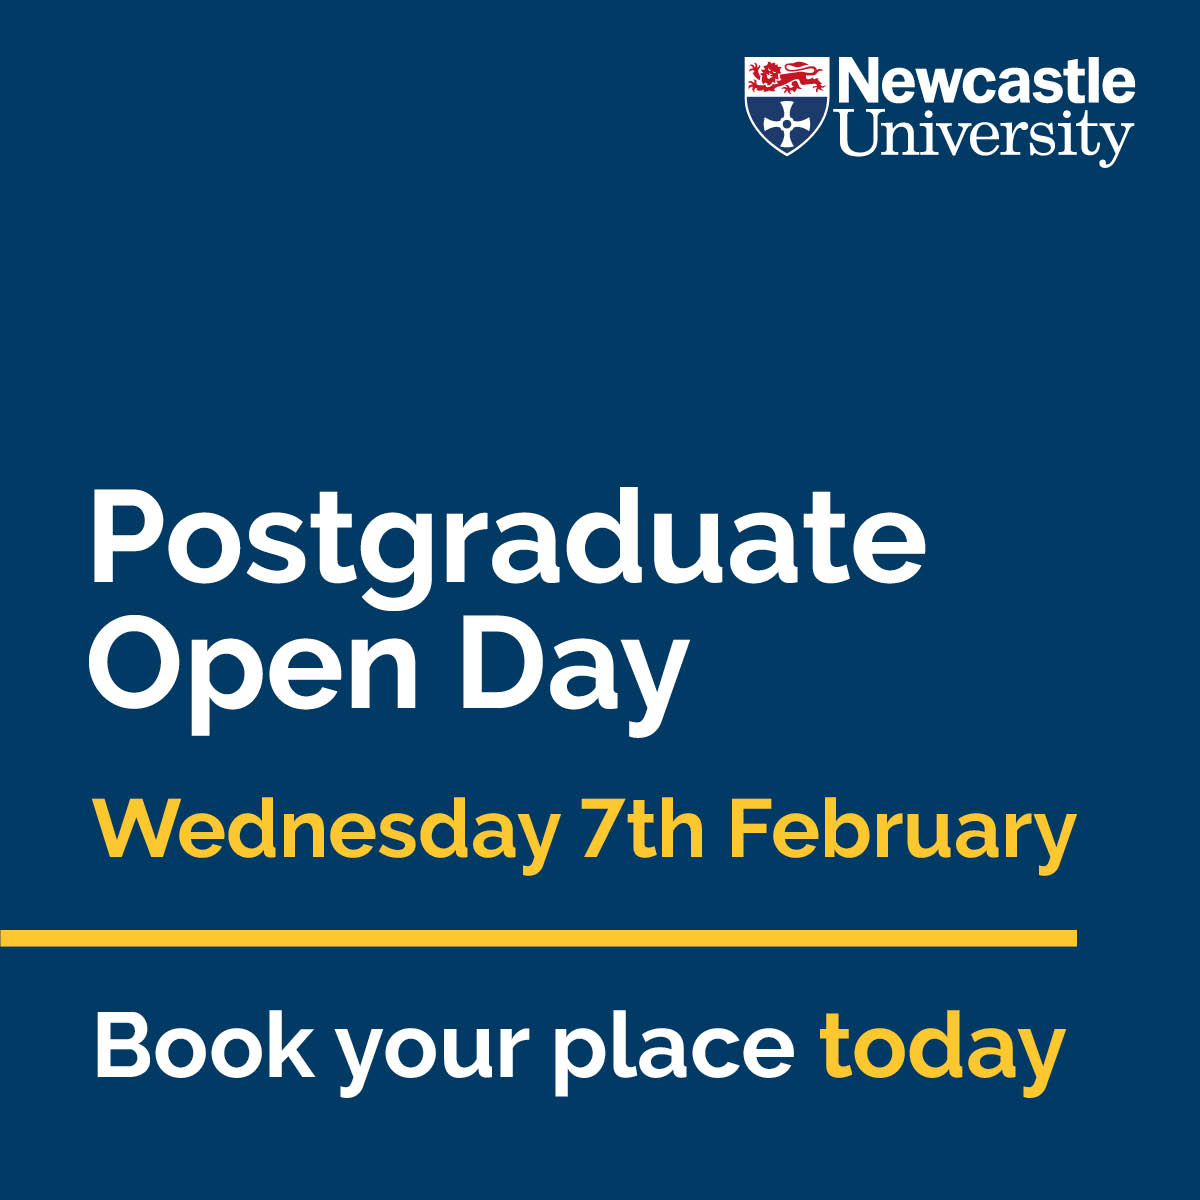 There's still time to book your place at our Postgraduate Open Day happening tomorrow! We'll have staff and students ready to answer all your postgraduate questions. Come down and say hi. Book your place here: ncl.ac.uk/study/meet/pos…